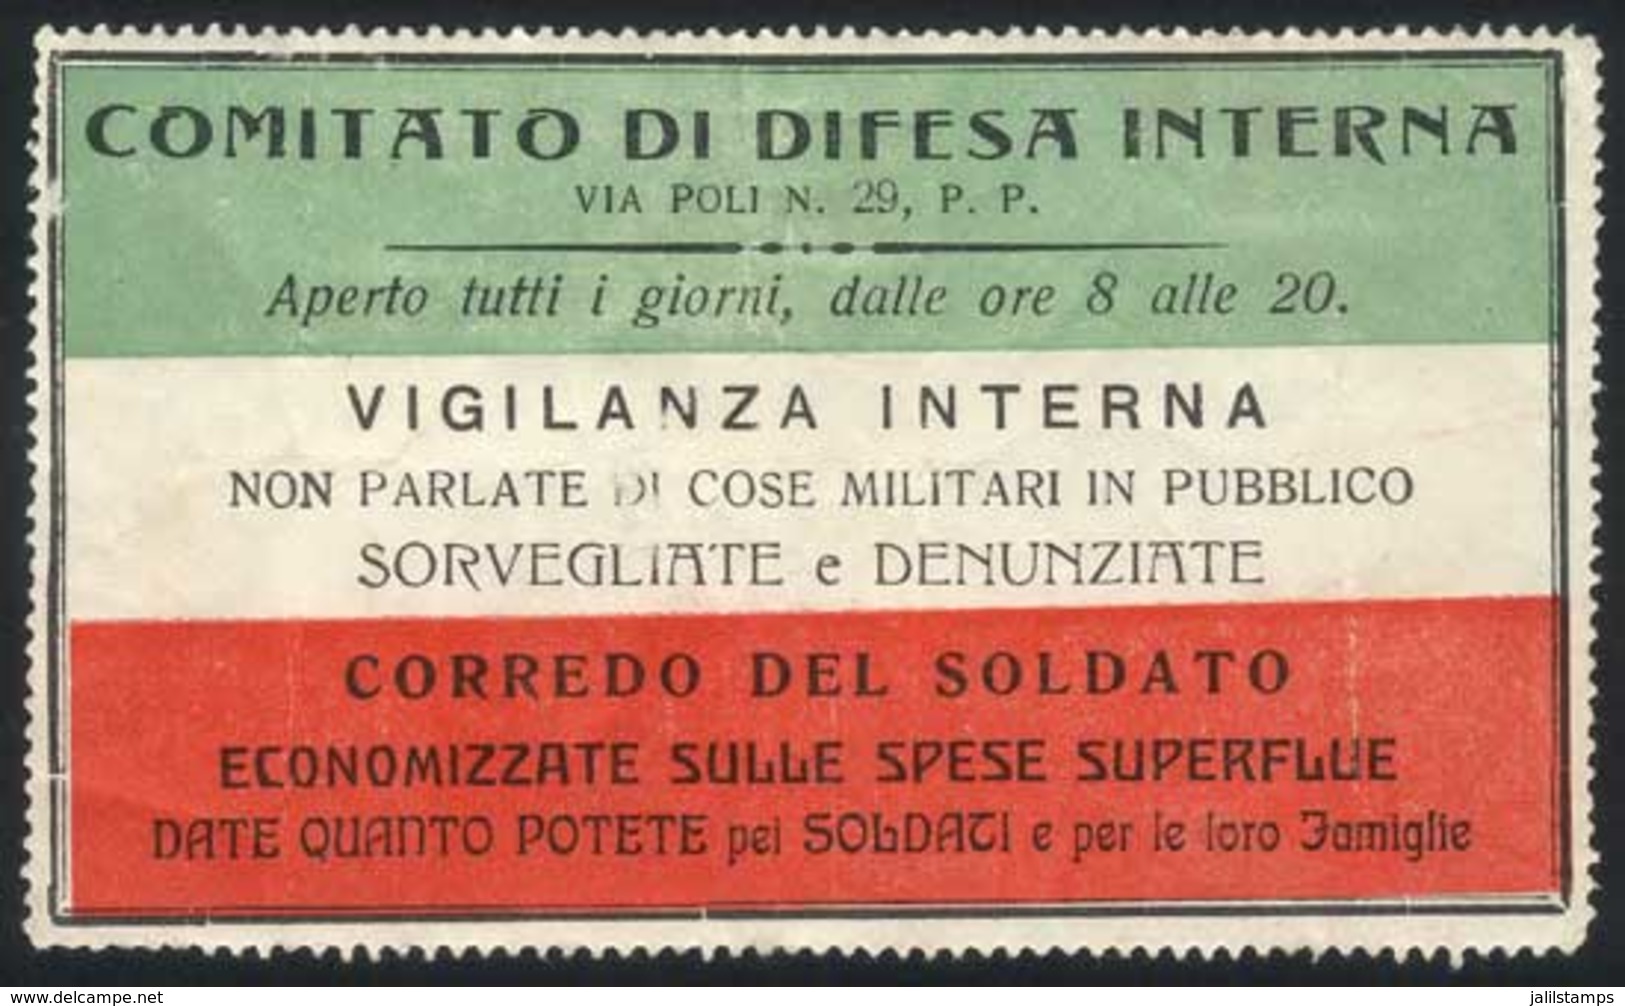 ITALY: Old Cinderella, Circa 1920, Patriotic, Large Size (95 X 55 Mm Approximately), Little Defects, Good Appeal, Fantas - Unclassified